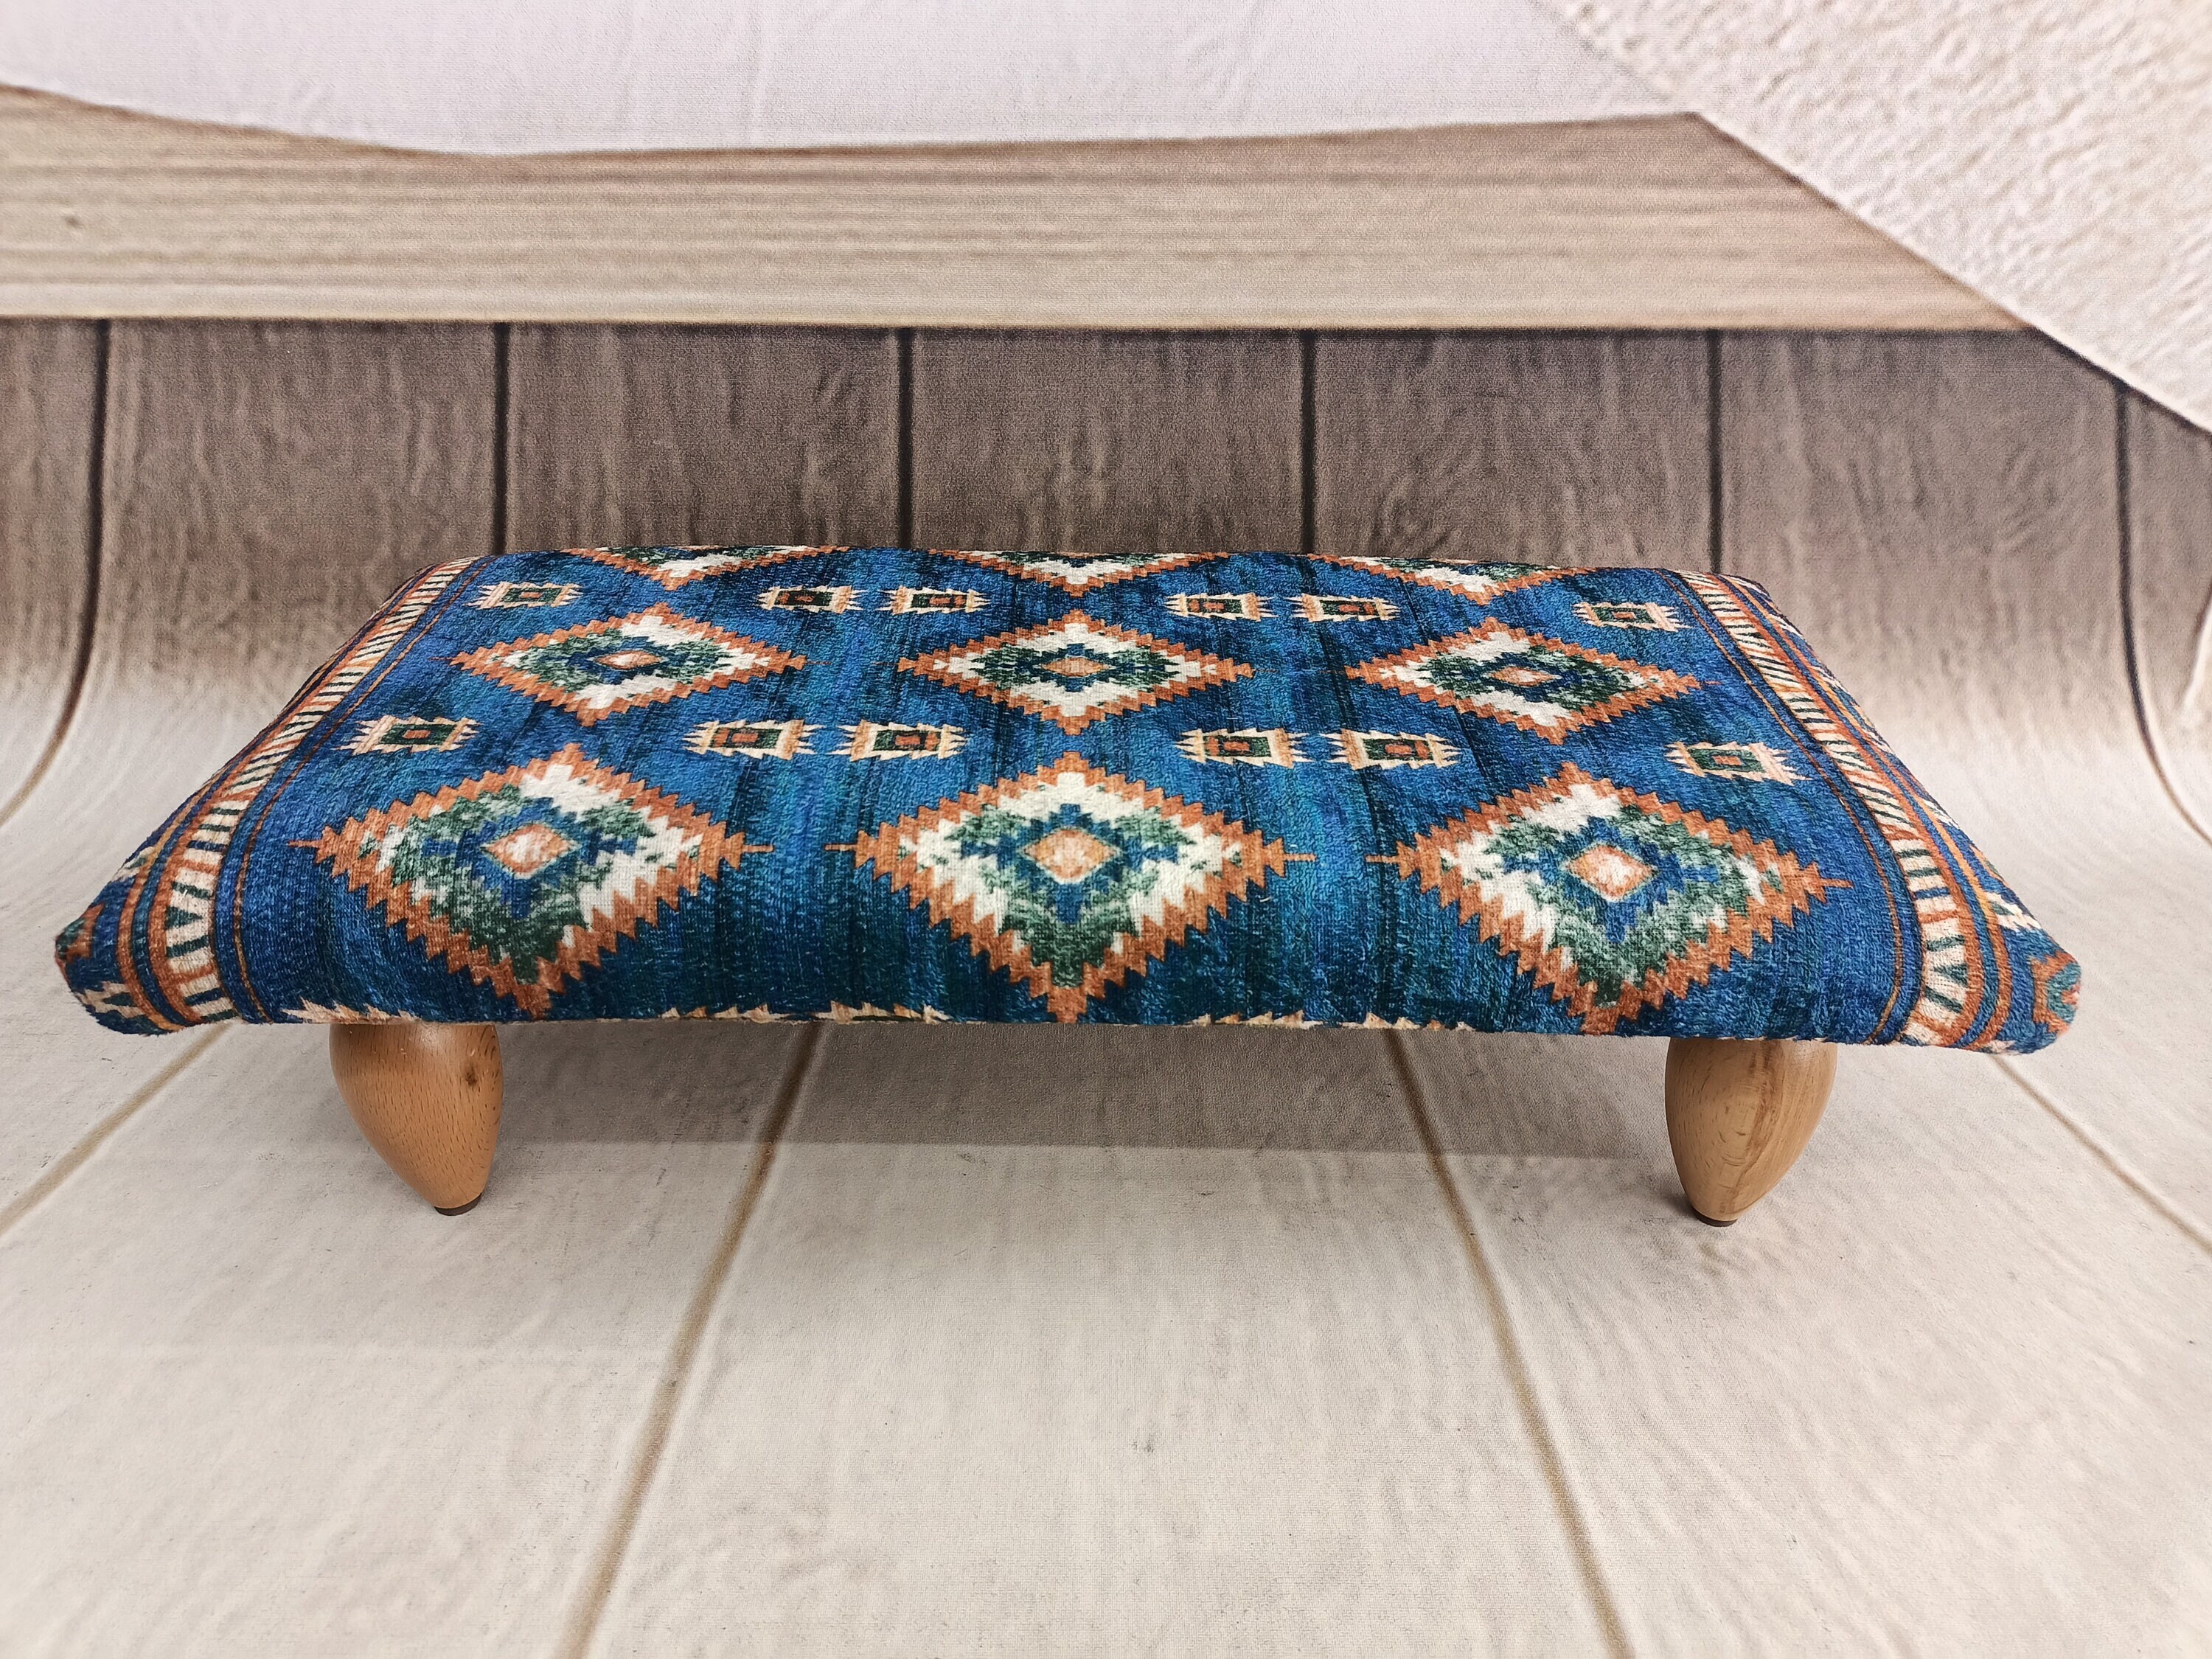 Footrest Elevated Foot Stool Adjustable Rest Rolling Wheels Tapestry Wooden